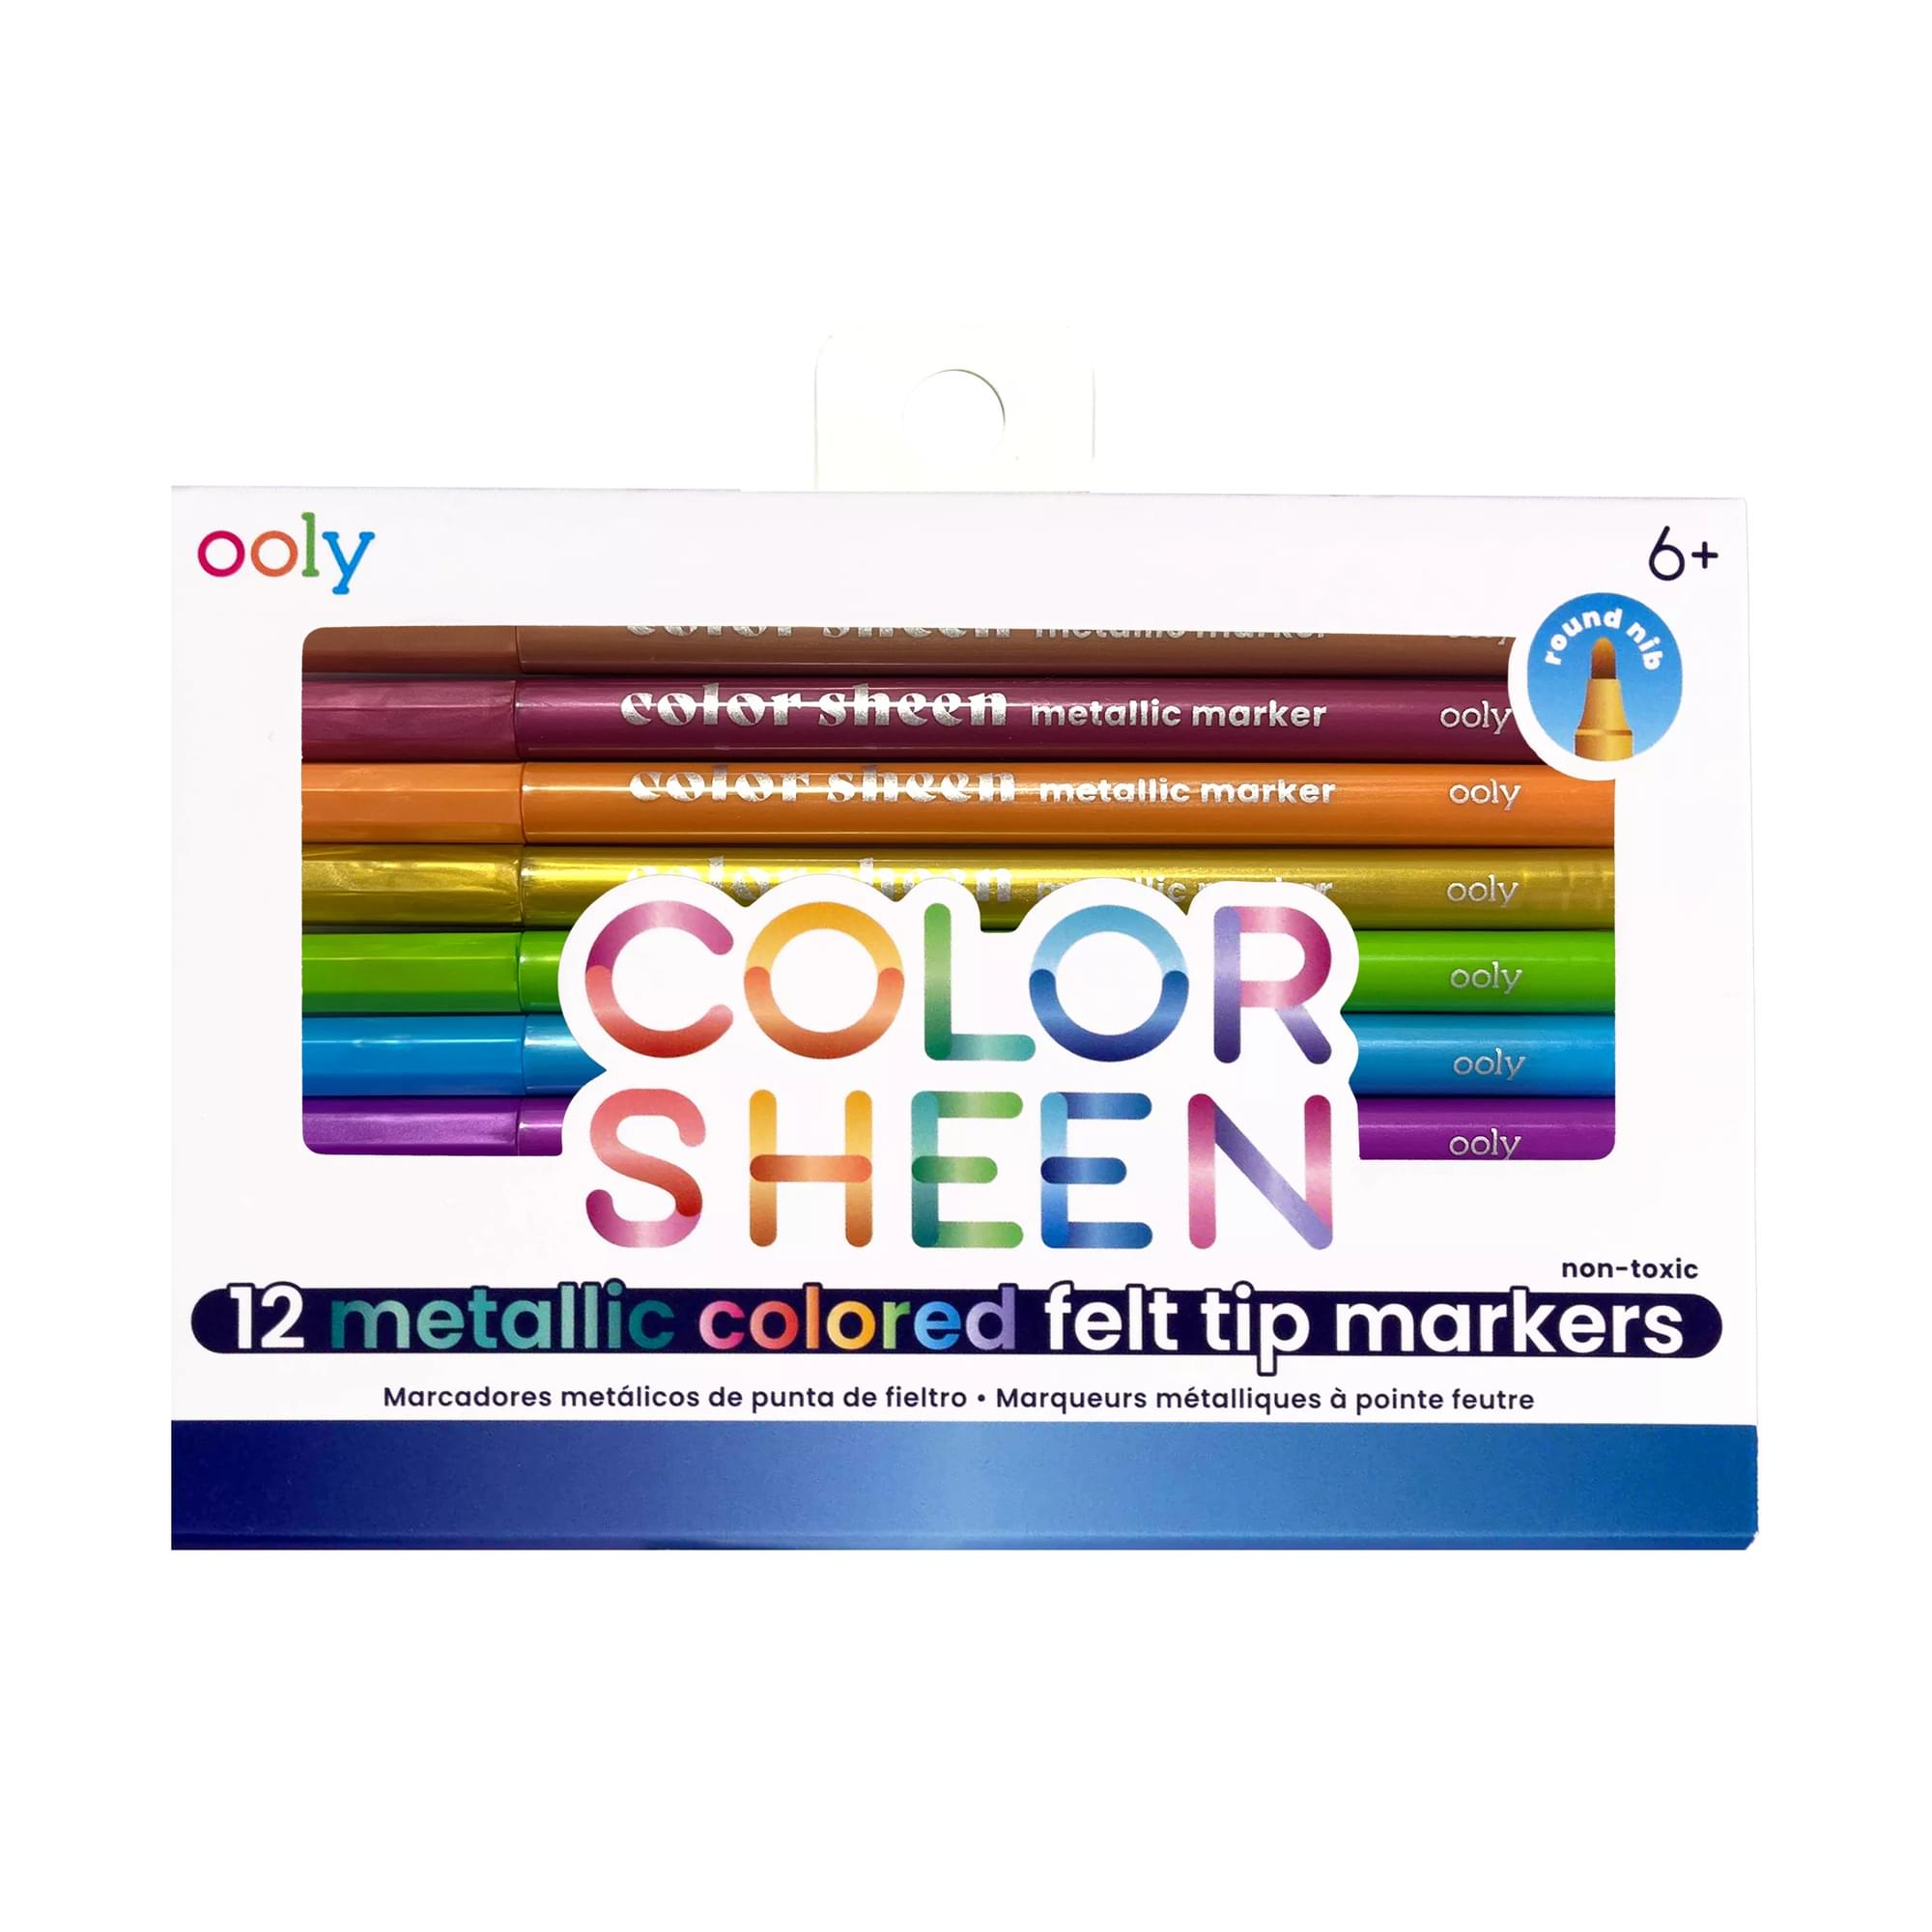 Dual Tone Double Ended Brush Marker - Set of 12/24 colors - OOLY